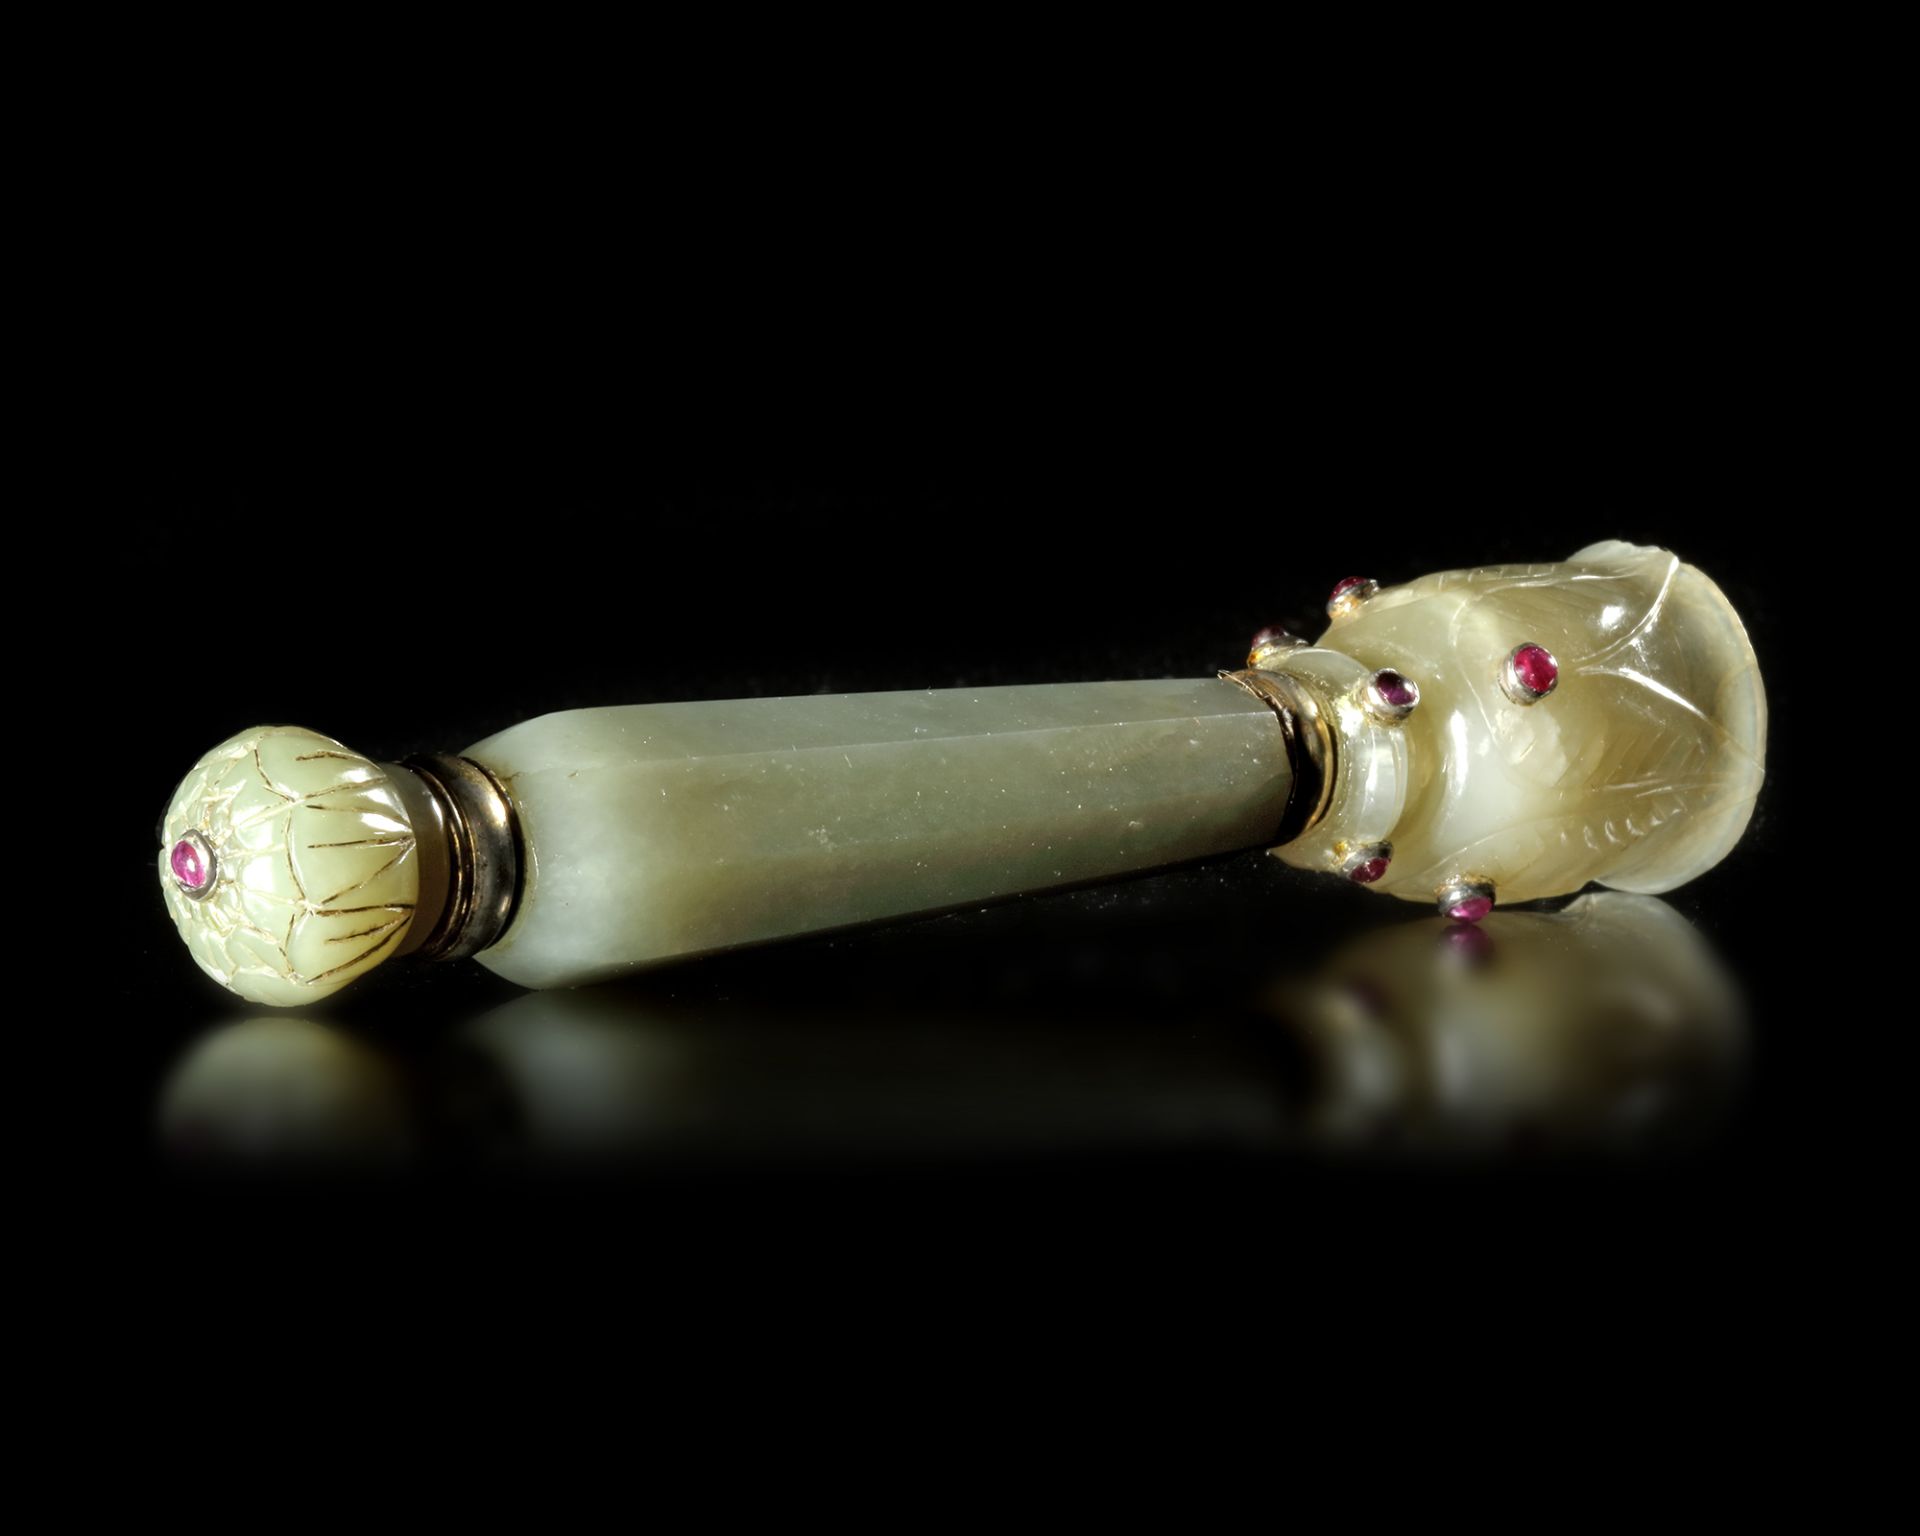 A MUGHAL GEM-SET CARVED JADE FLY WHISK, INDIA, 18TH CENTURY - Image 3 of 4